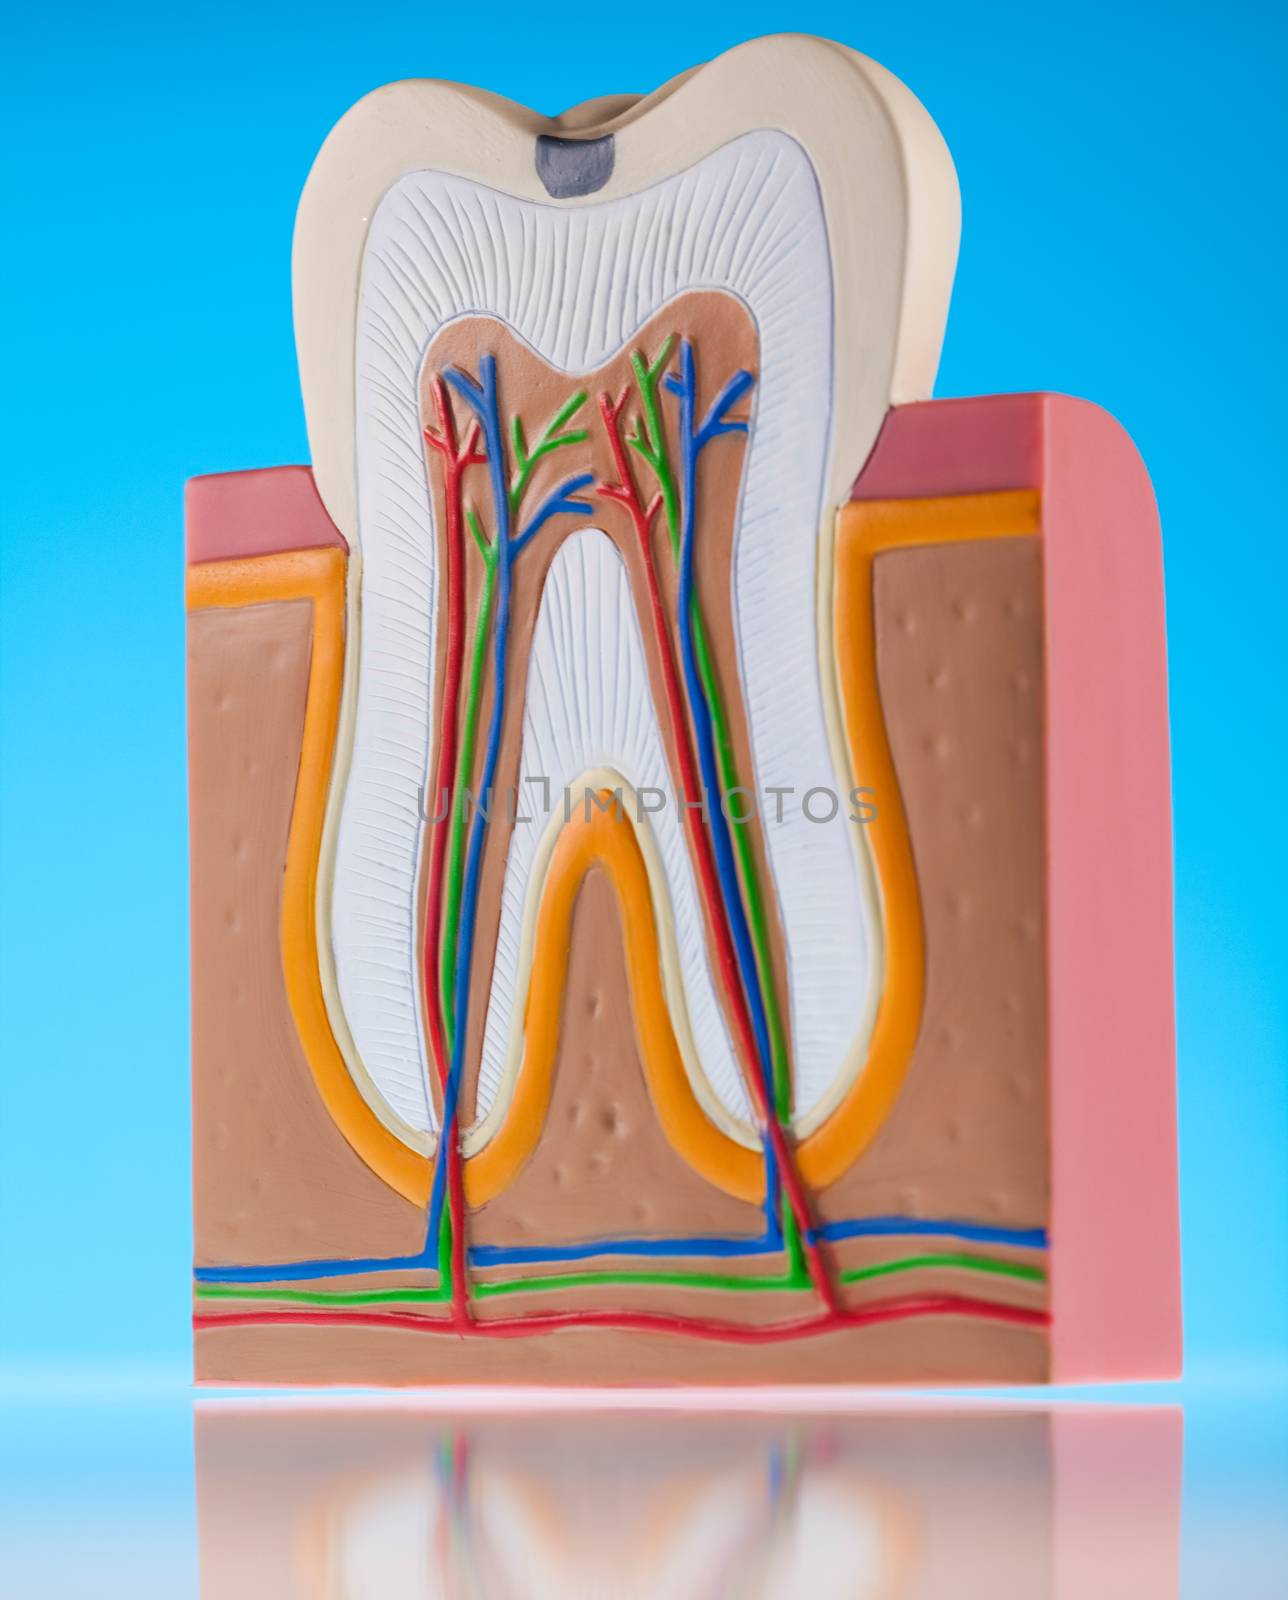 Tooth, bright colorful tone concept